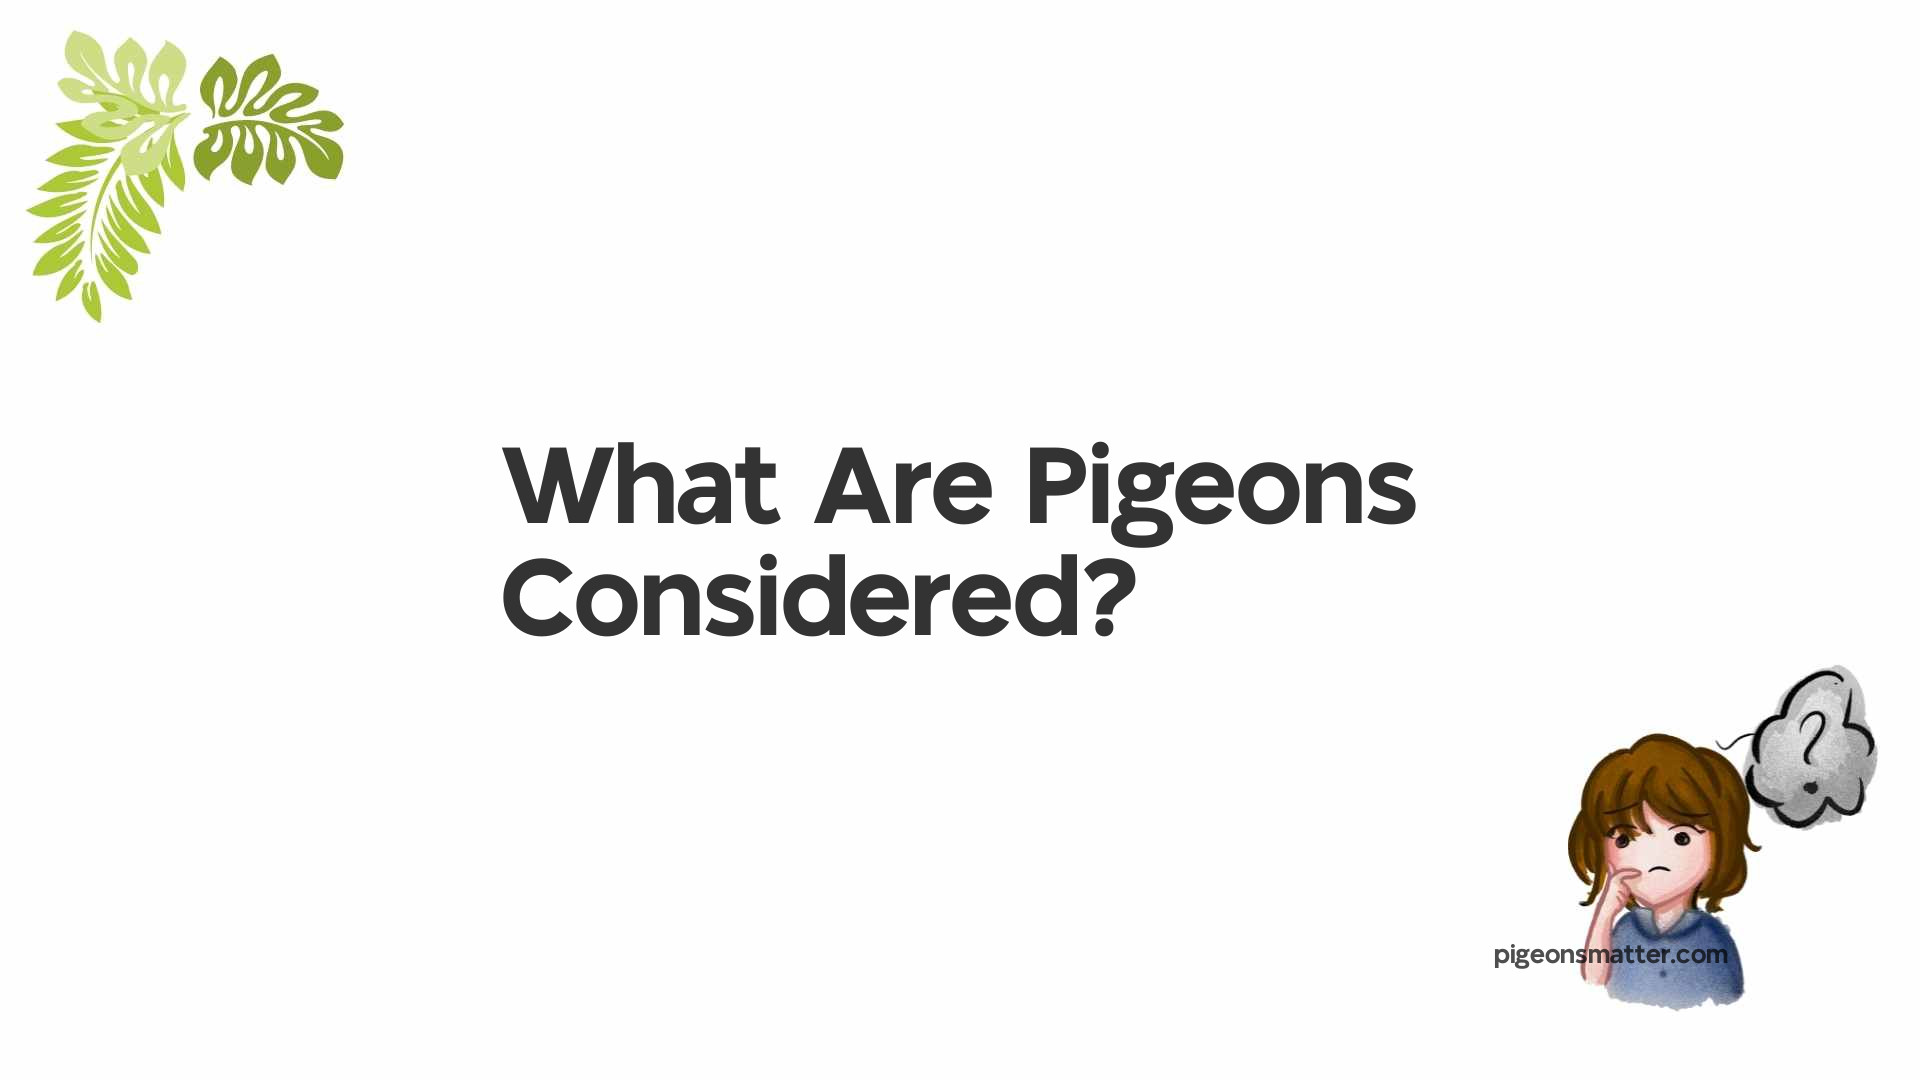 What Are Pigeons Considered?